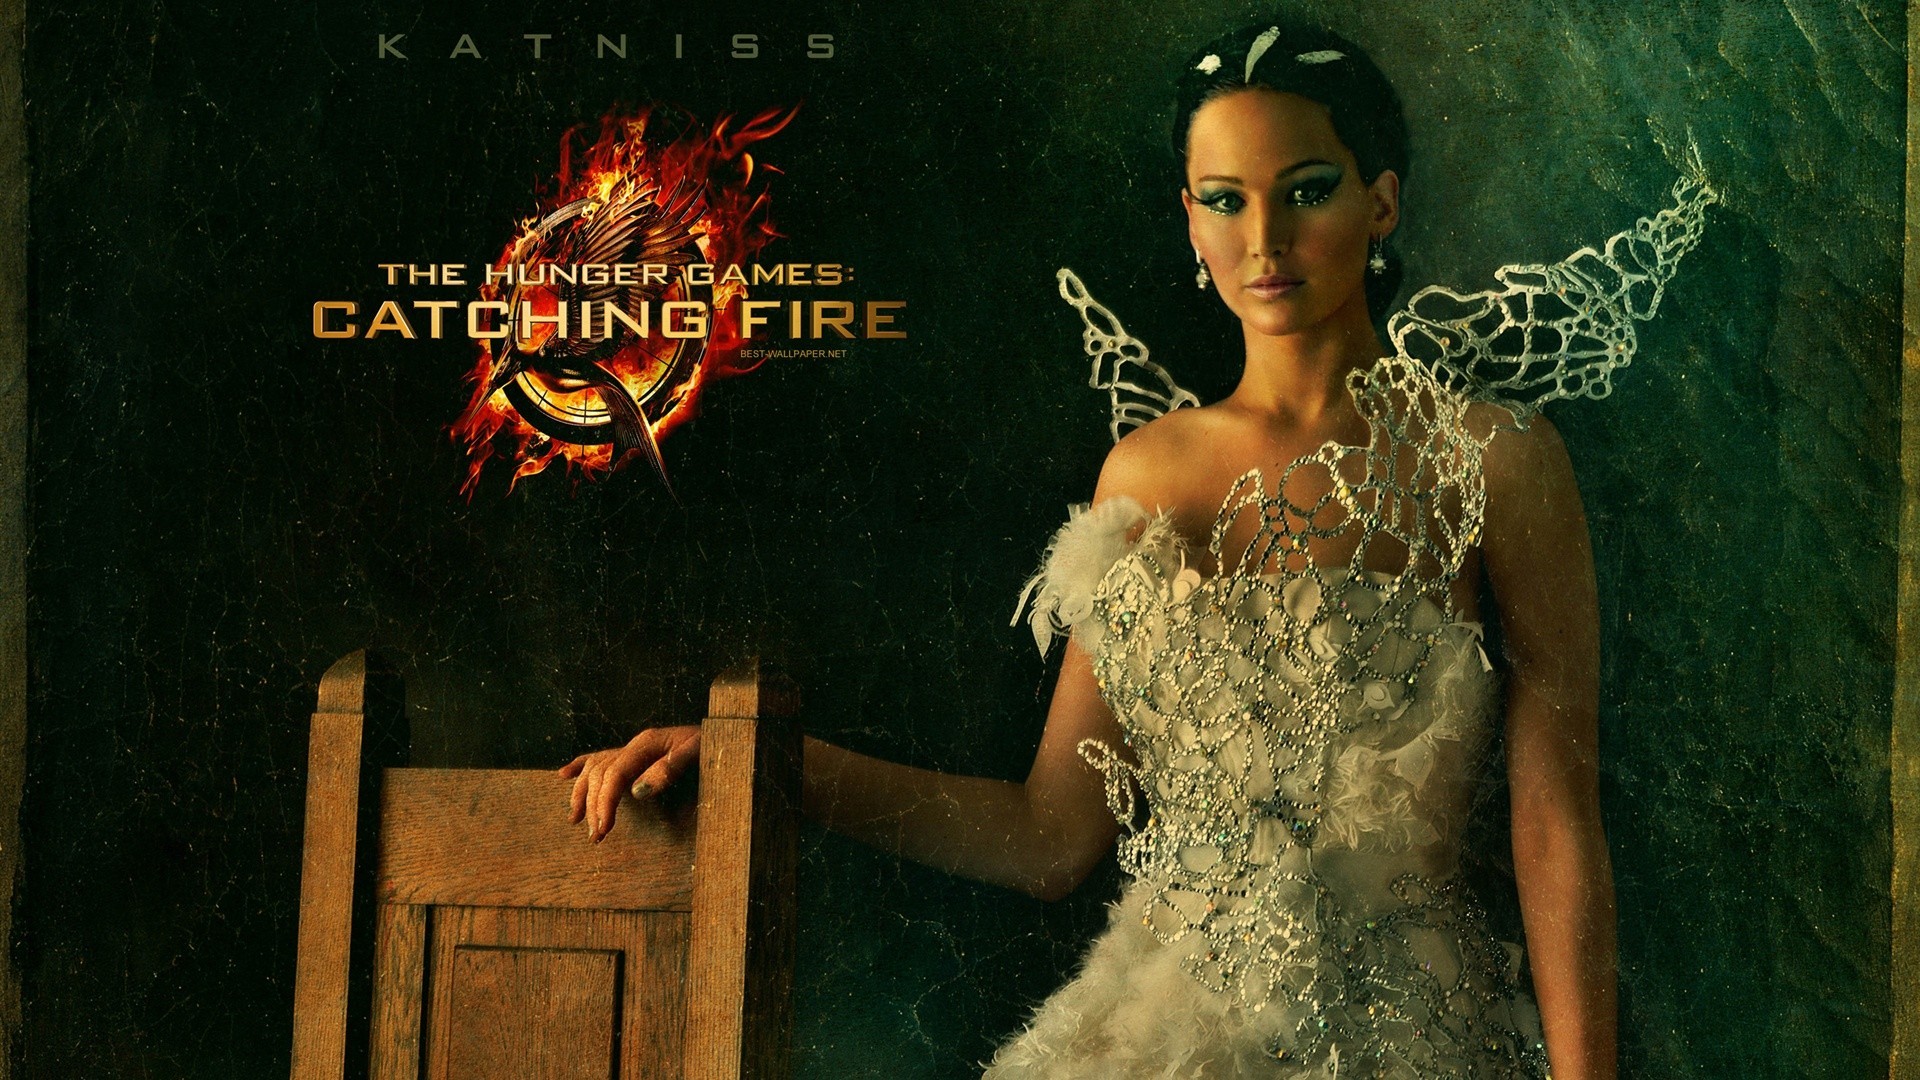 The Hunger Games, Movies, Jennifer Lawrence, The Hunger Games: Catching Fire Wallpaper